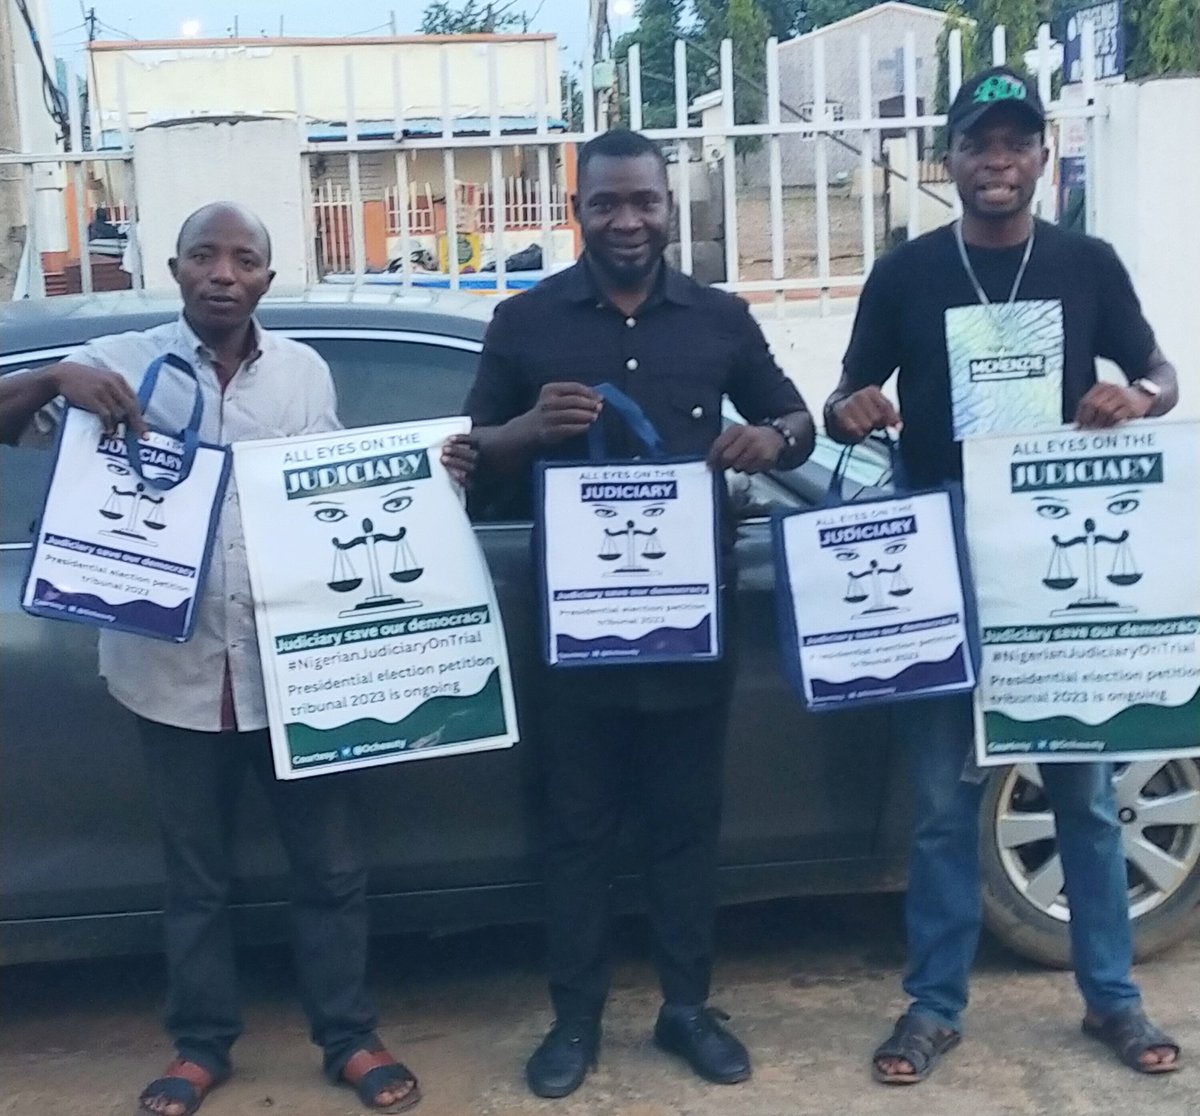 Today at wuse market, to distribute materials, like phone stickers, car stickers, posters and bags to market men and women in FCT, telling them that it's not over yet, the end to their suffering is coming, a new Nigeria is PO-ssible. COURTESY@Ocheauty ALL EYES ON THE JUDICIARY.